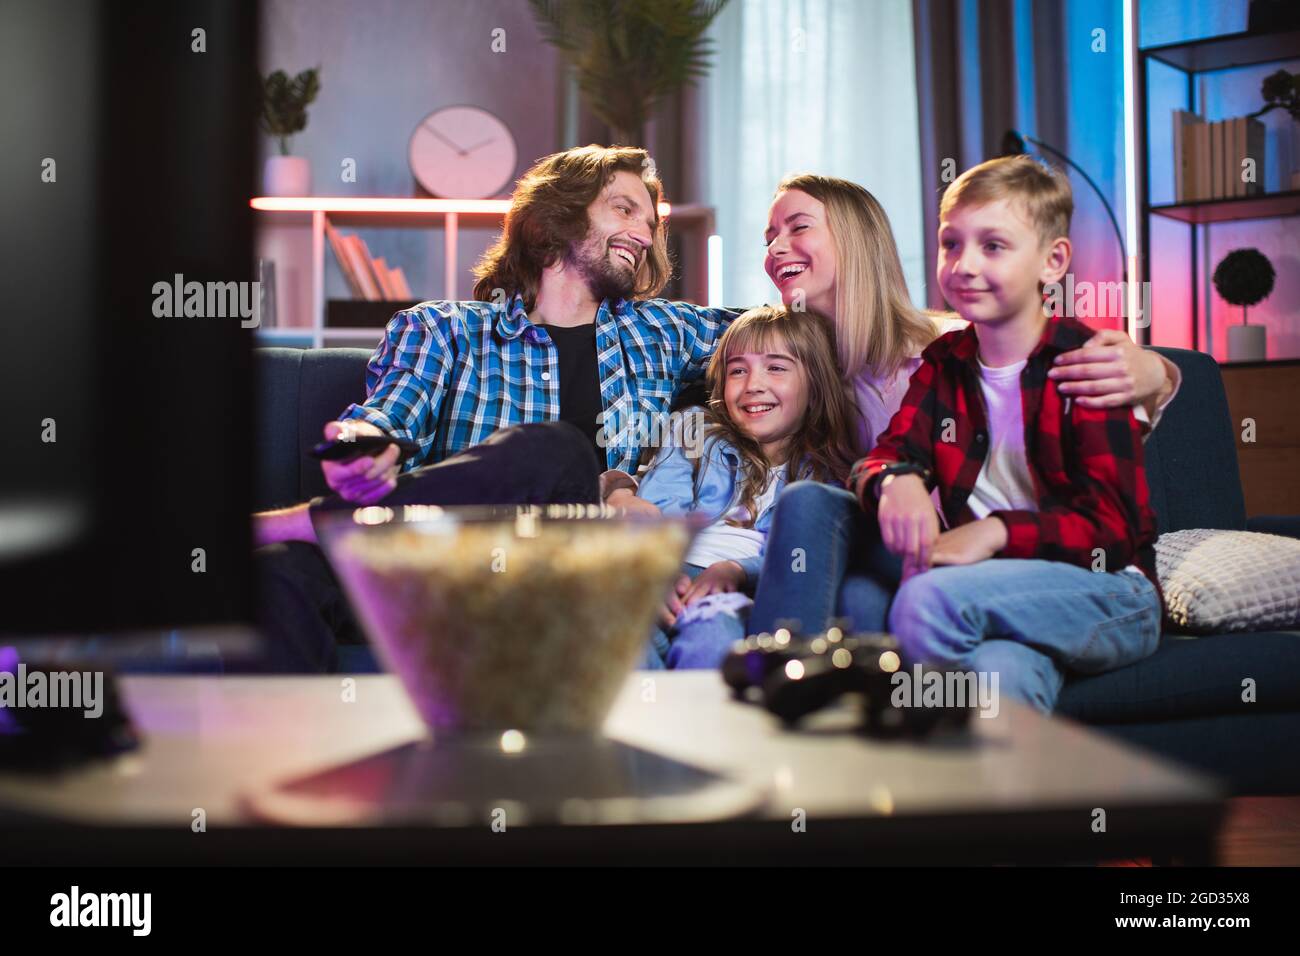 Young parents with son and daughter relaxing on comfy couch, watching TV, smiling and talking. Happy family together at home. Concept of love and unity. Stock Photo